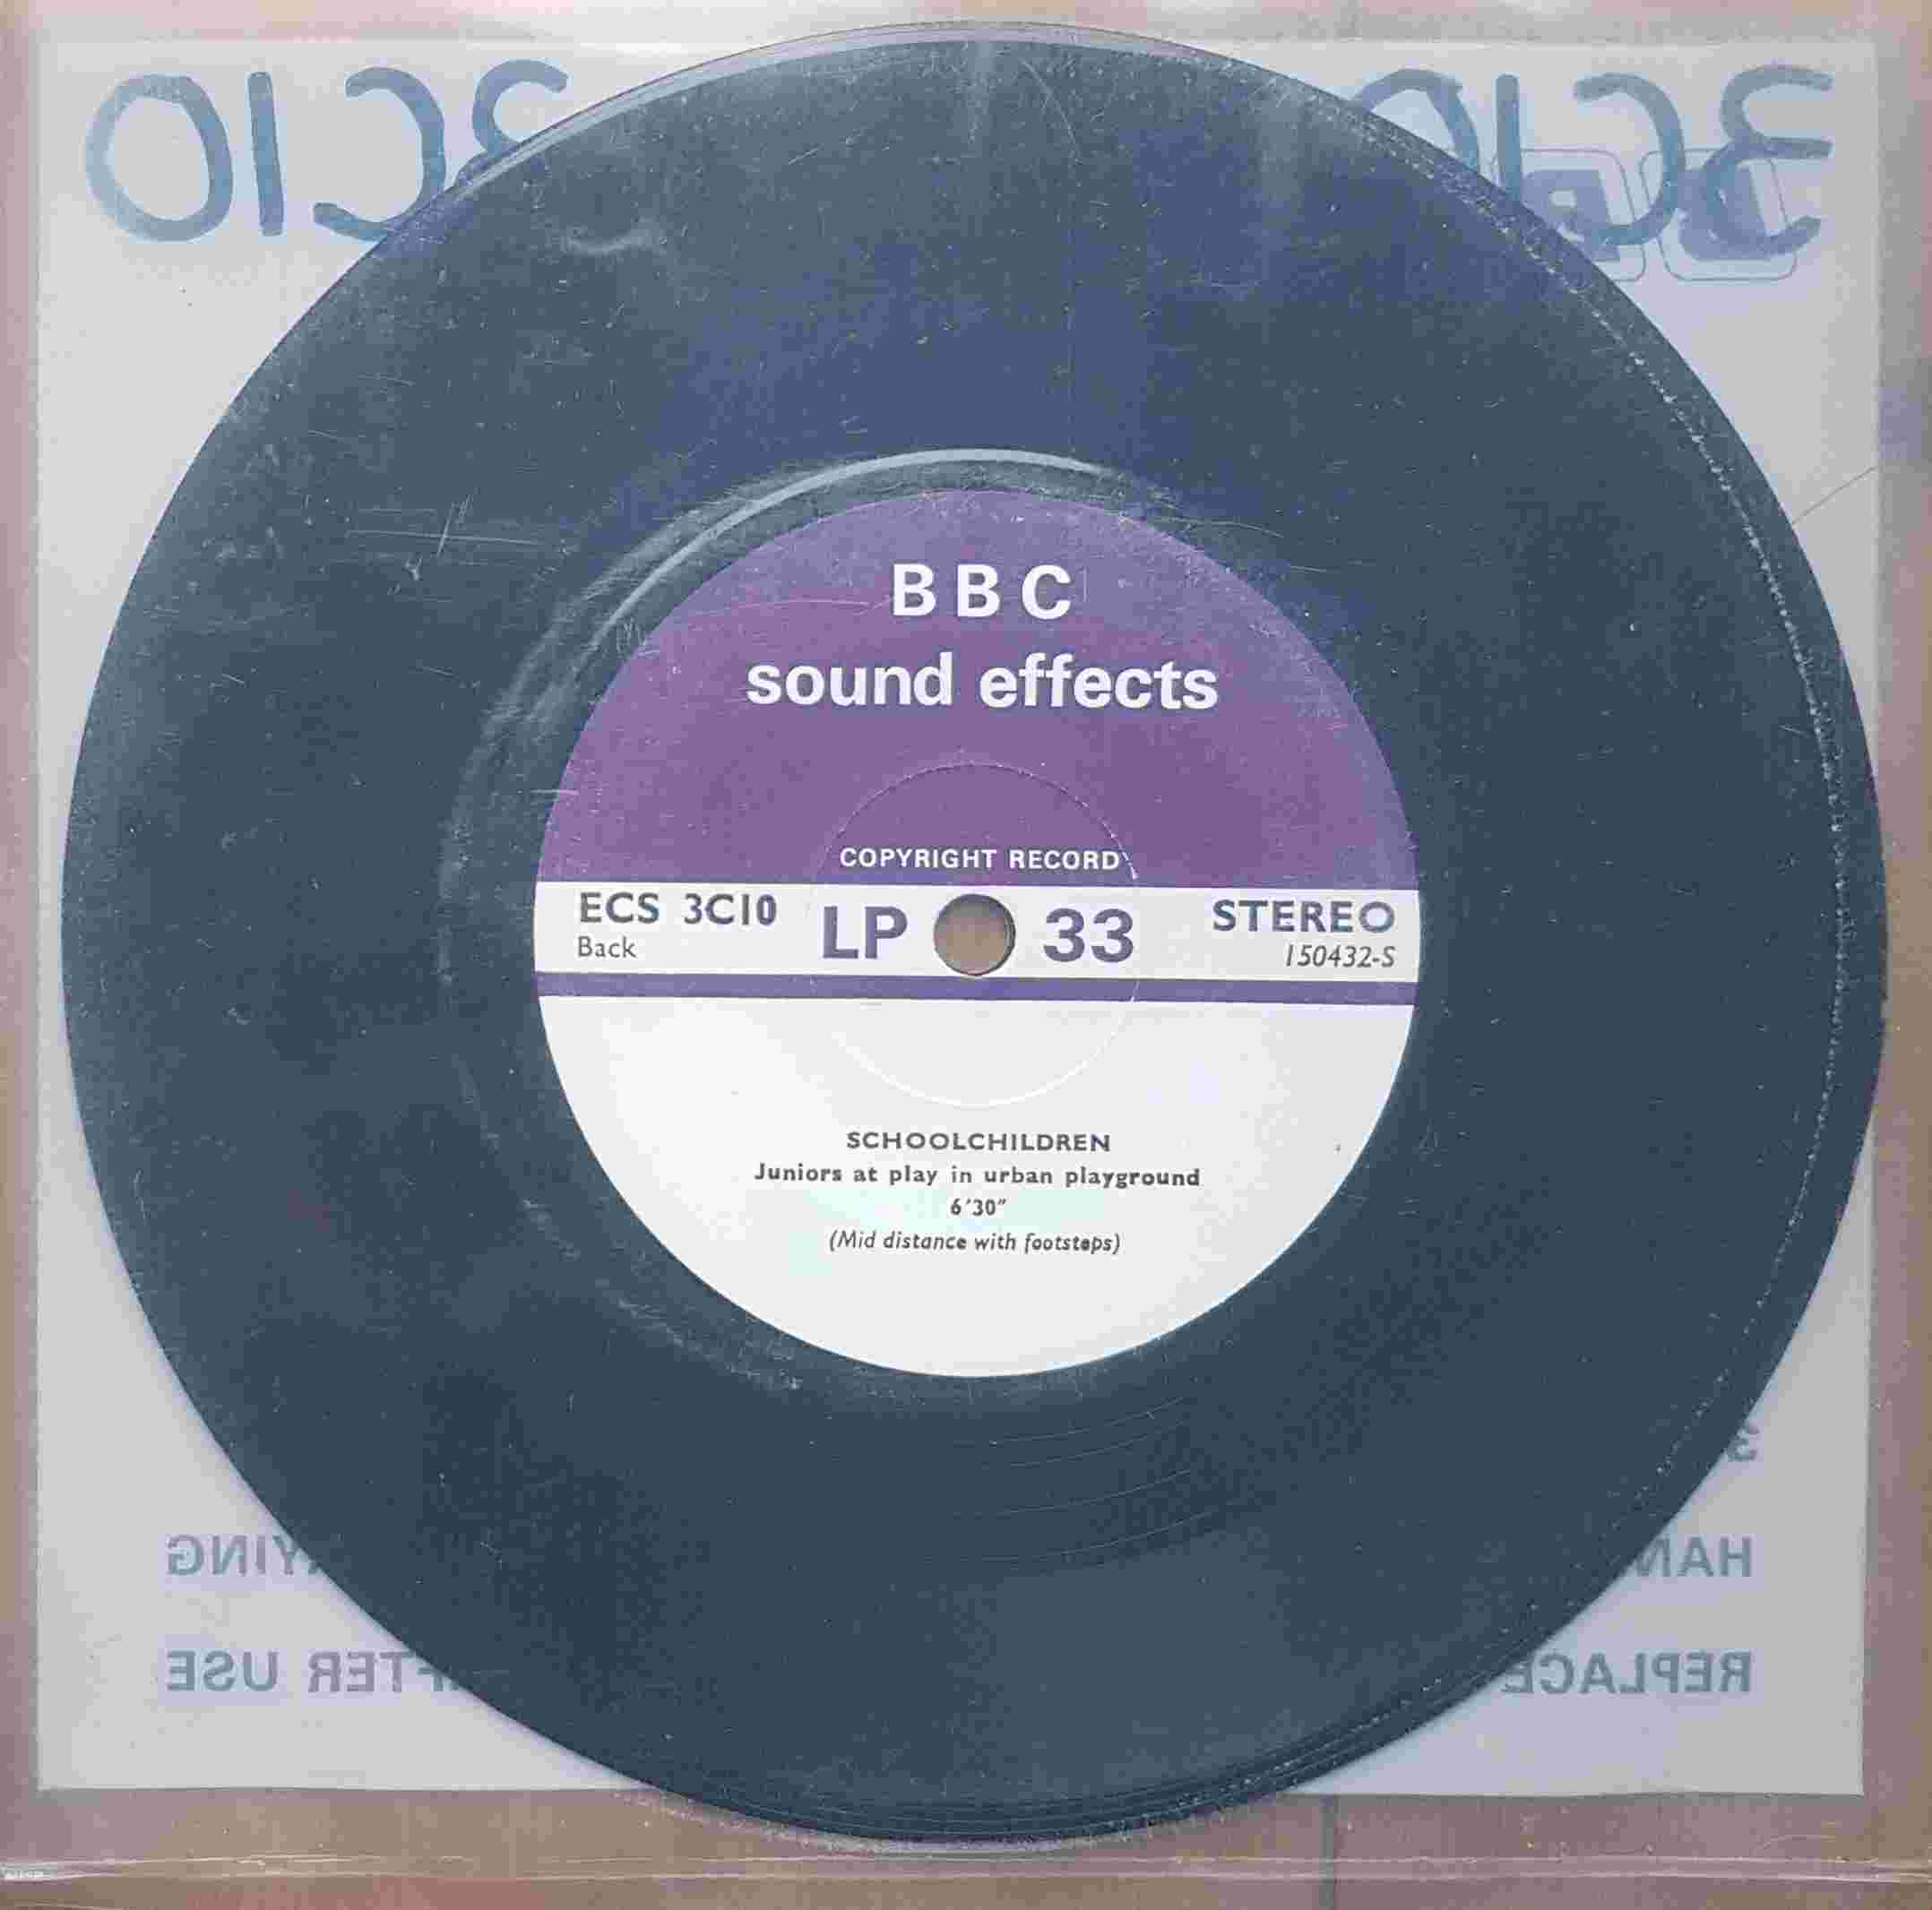 Picture of ECS 3C10 School children by artist Not registered from the BBC records and Tapes library